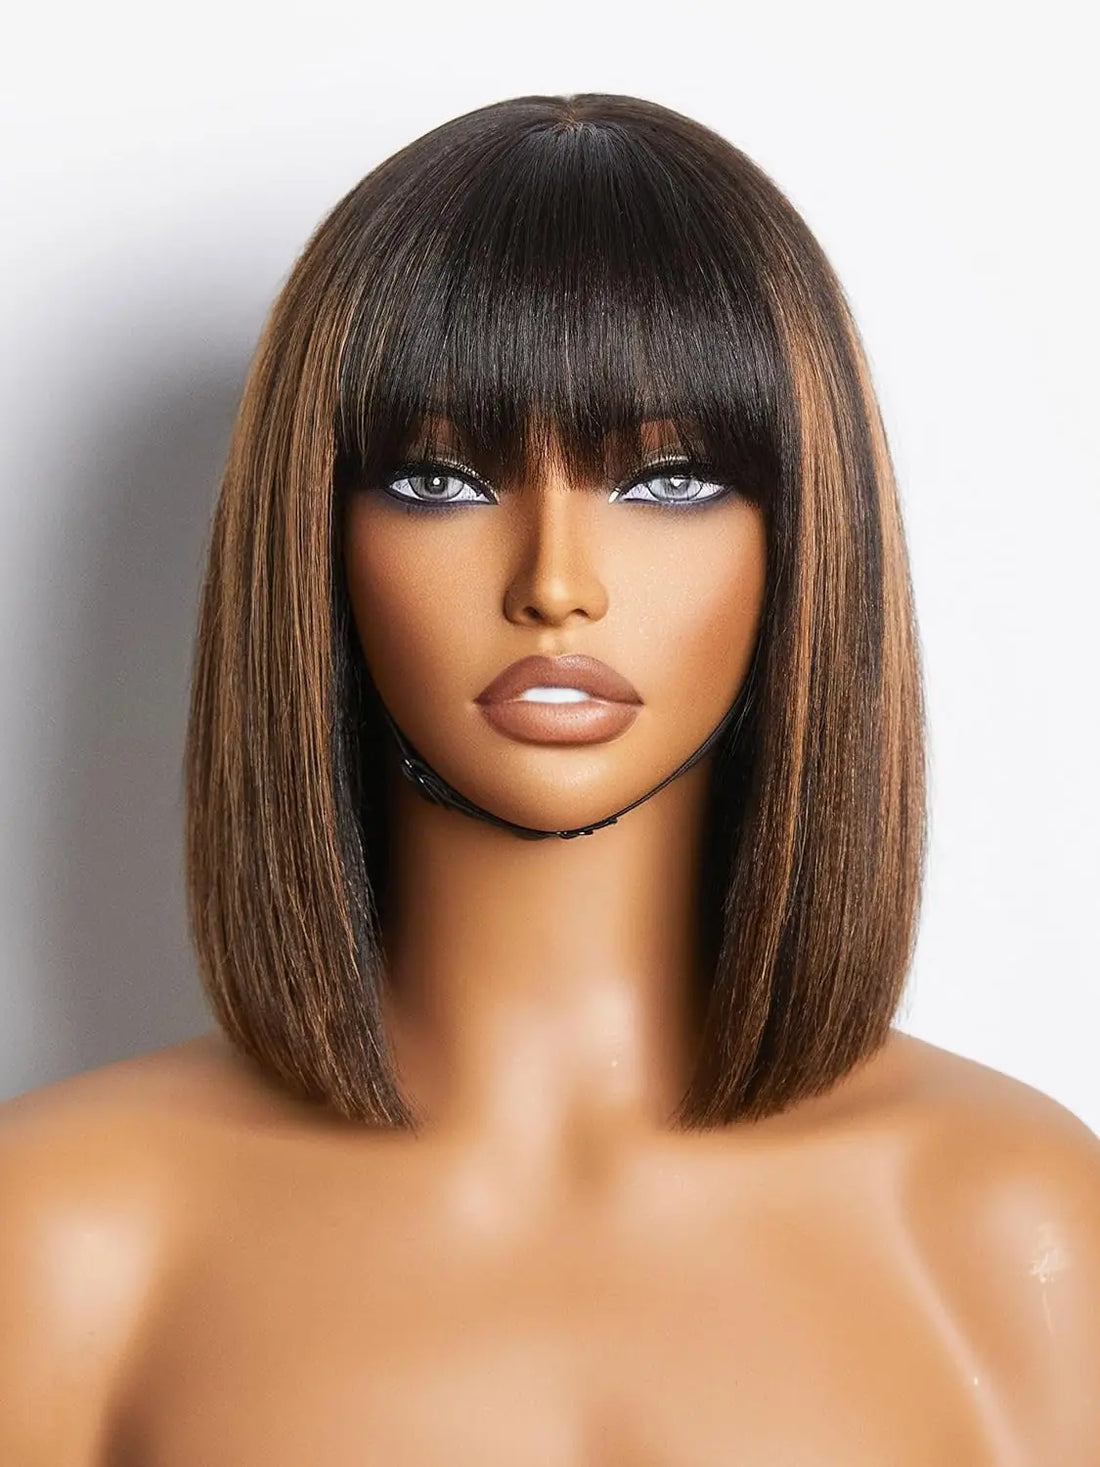 10 Inch Straight Bob Wig with Bangs Human Hair Glueless HD Lace Bob with Brown Highlights,